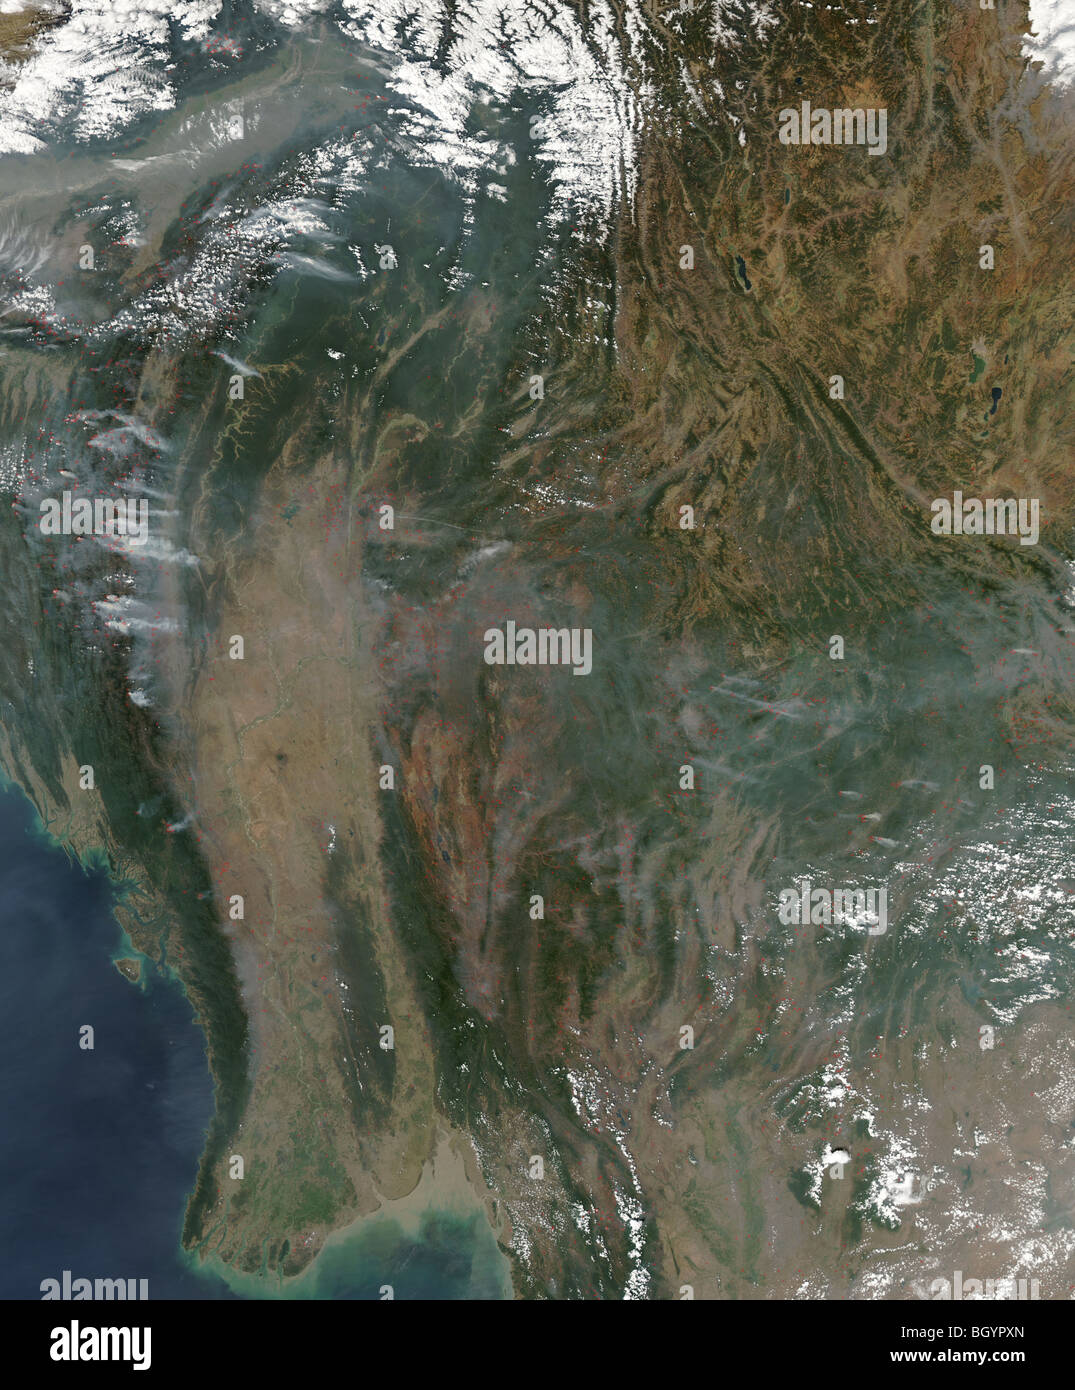 Satellite view of Myanmar. Small red squares are fires detected by the infrared camera .(only visible at 100% picture size) NASA Stock Photo